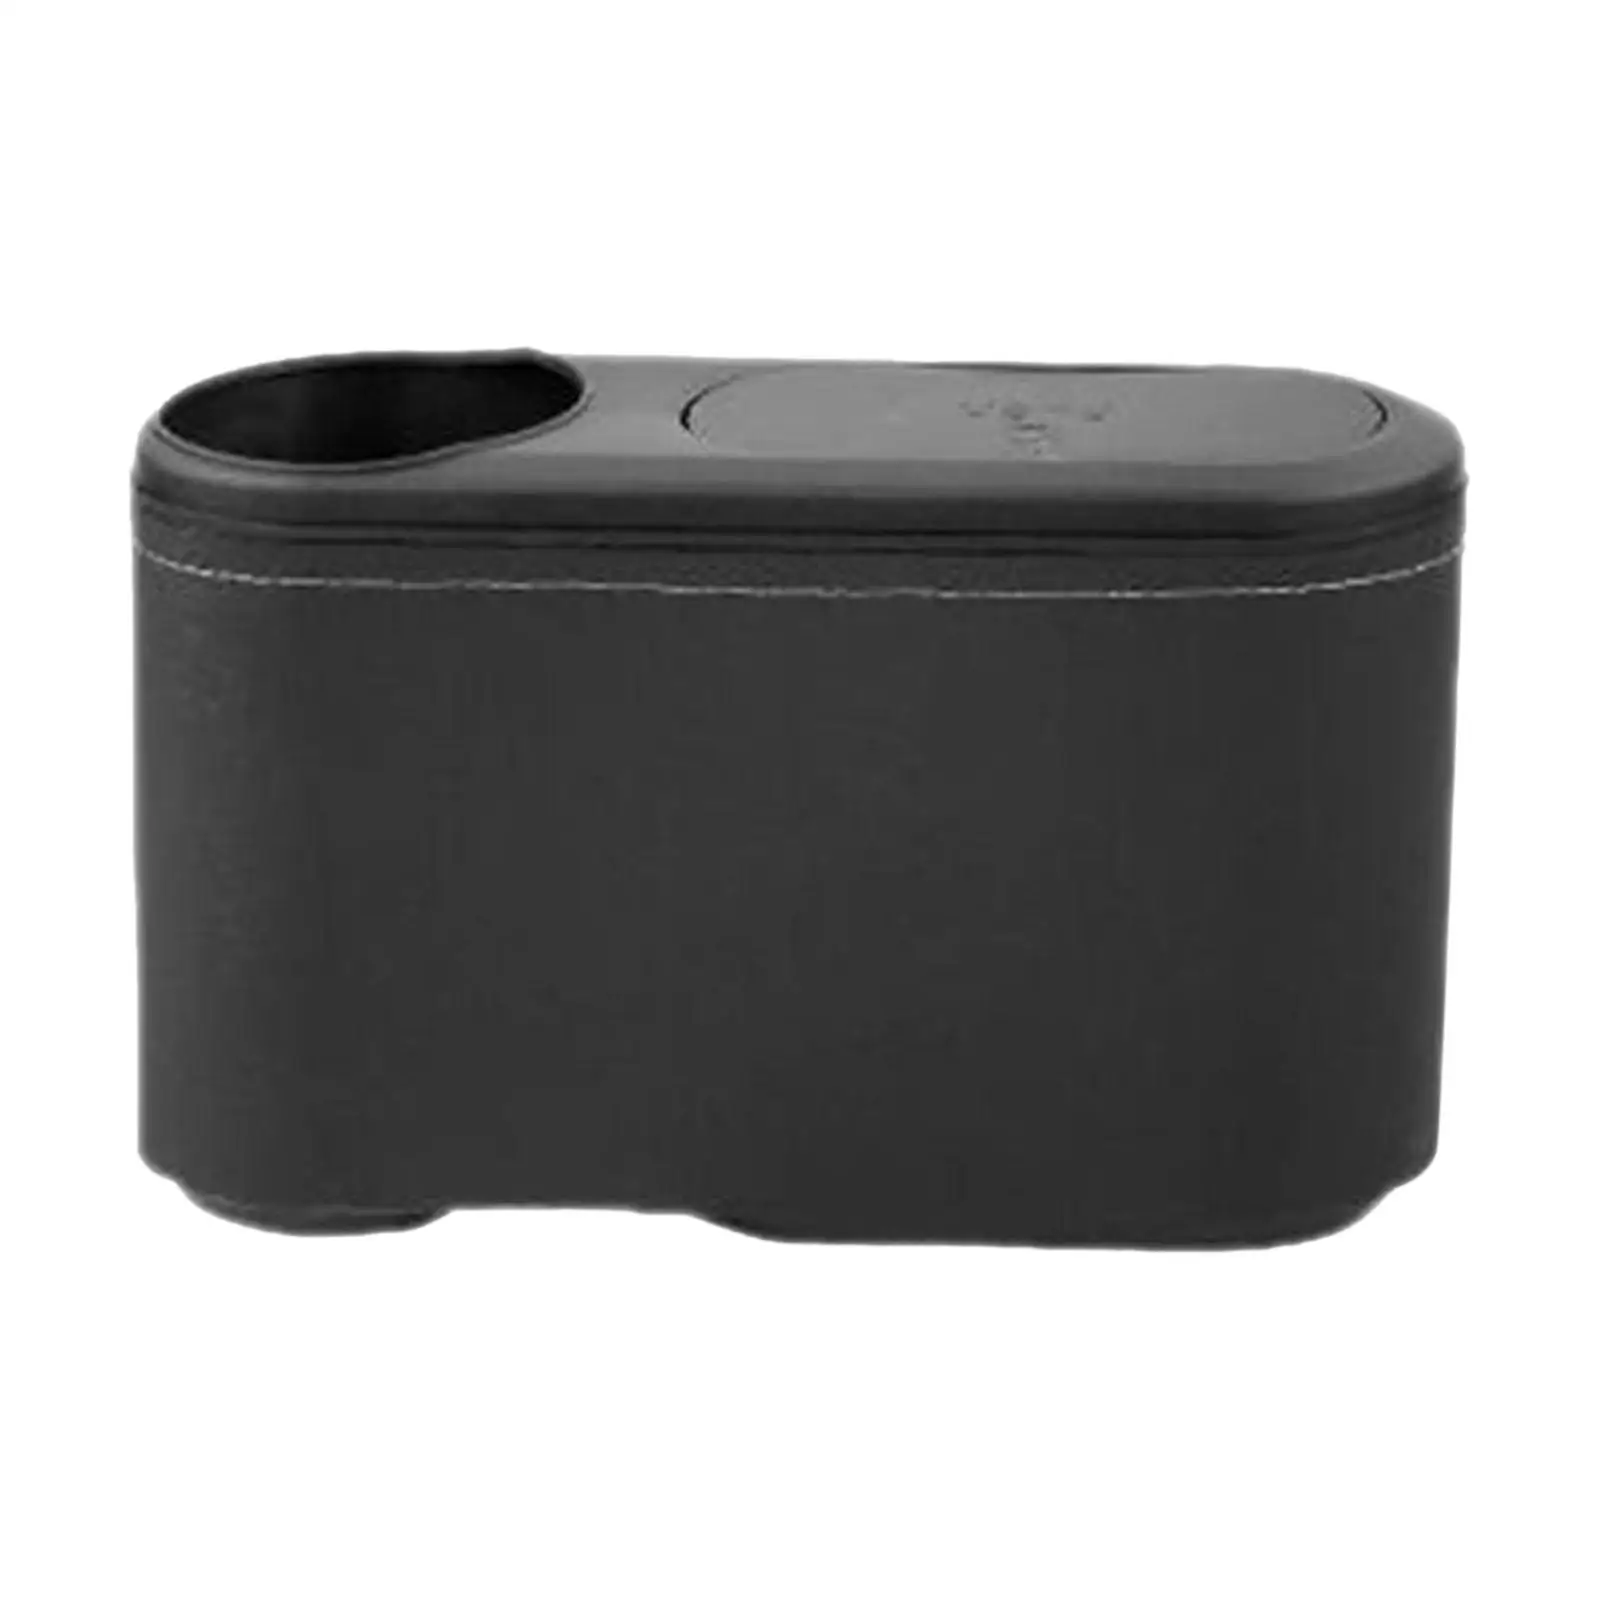 Car Trash Can Auto Interior Accessories Portable Leakproof Universal Storage Container for Card Phone Umbrella Keys Bottle